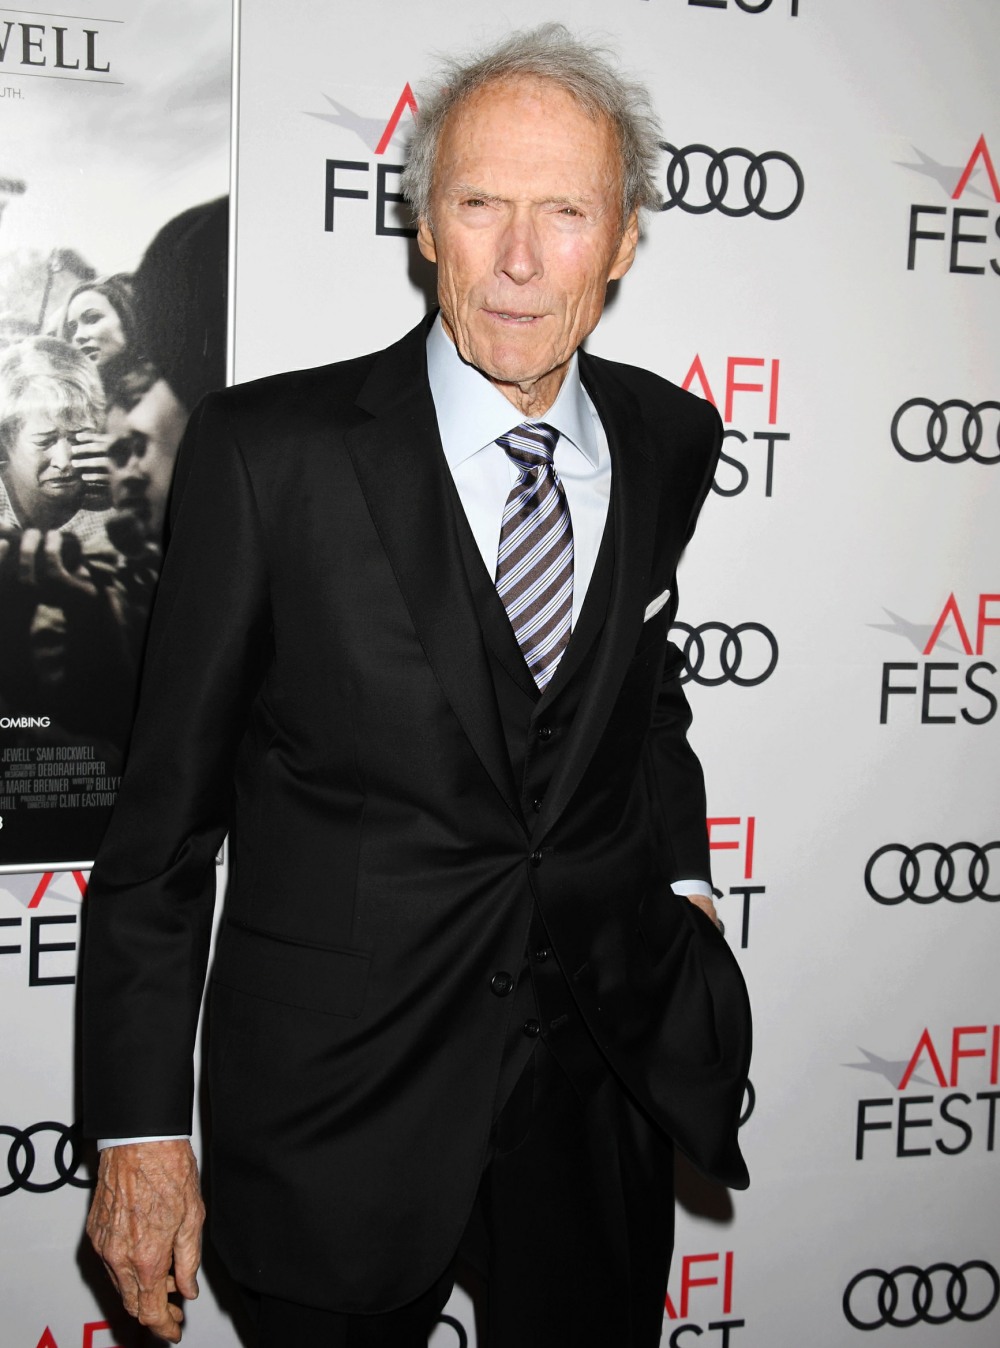 AFI FEST 2019 Presented By Audi "Richard Jewell" Premiere Arrivals